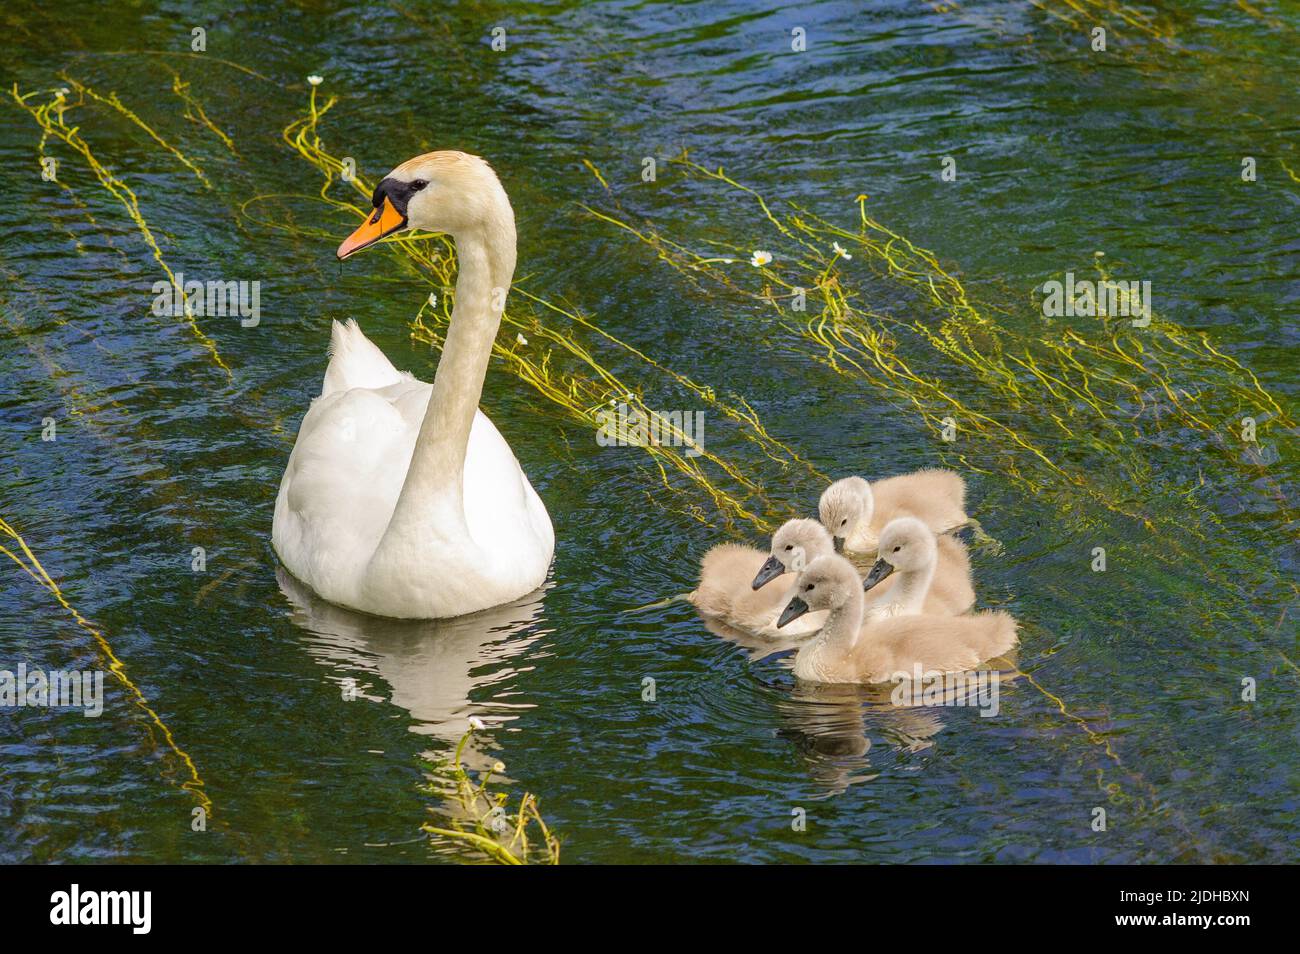 Swan with signets, June, UK Stock Photo